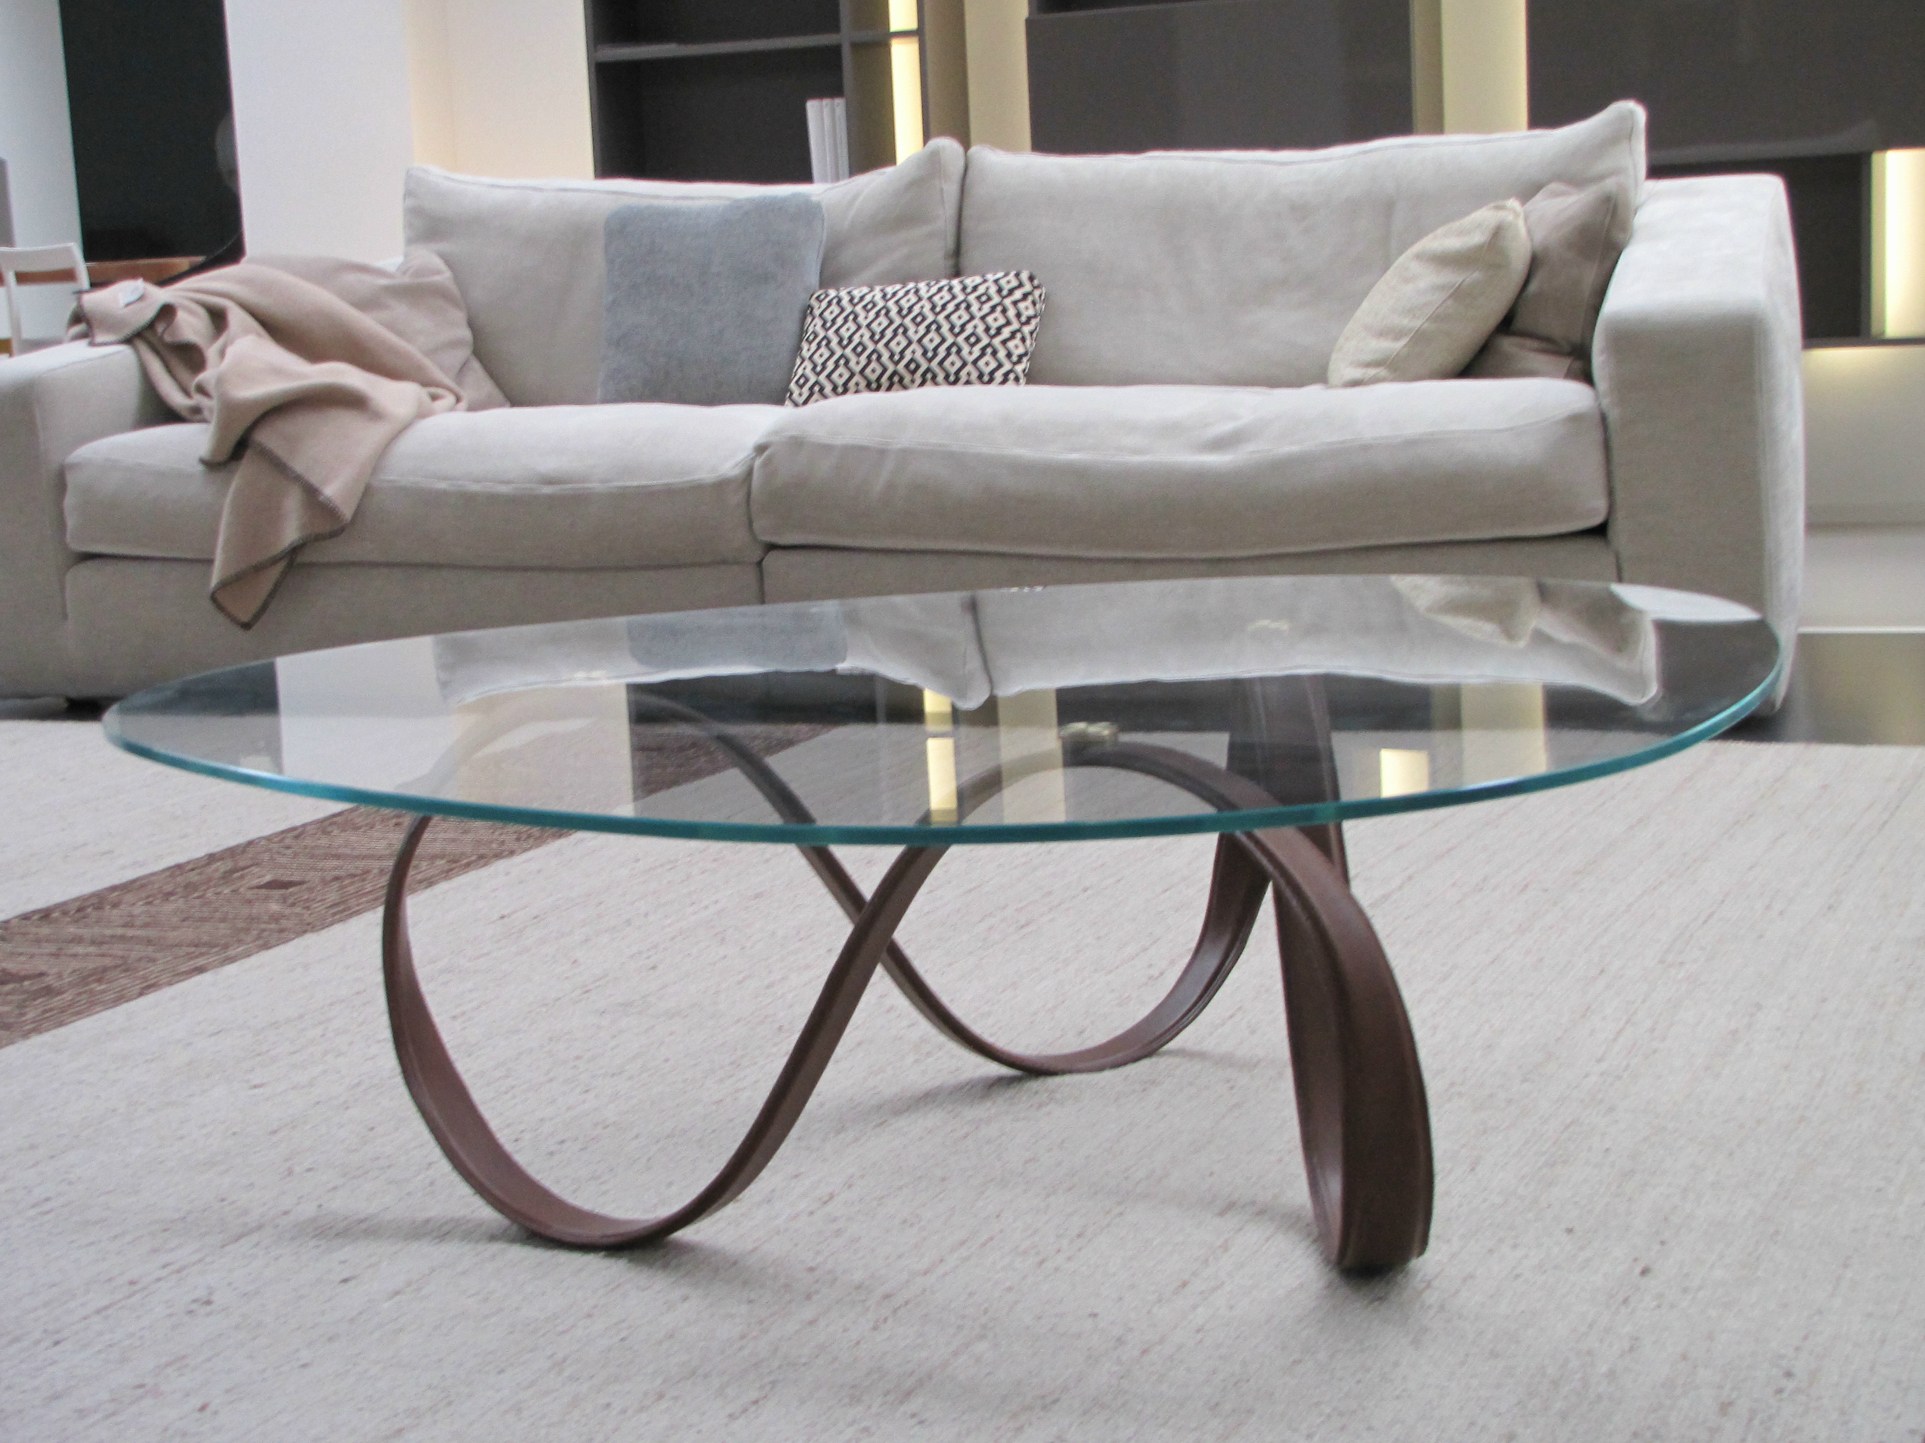 A glass coffee table inspired by the latest contemporary trends